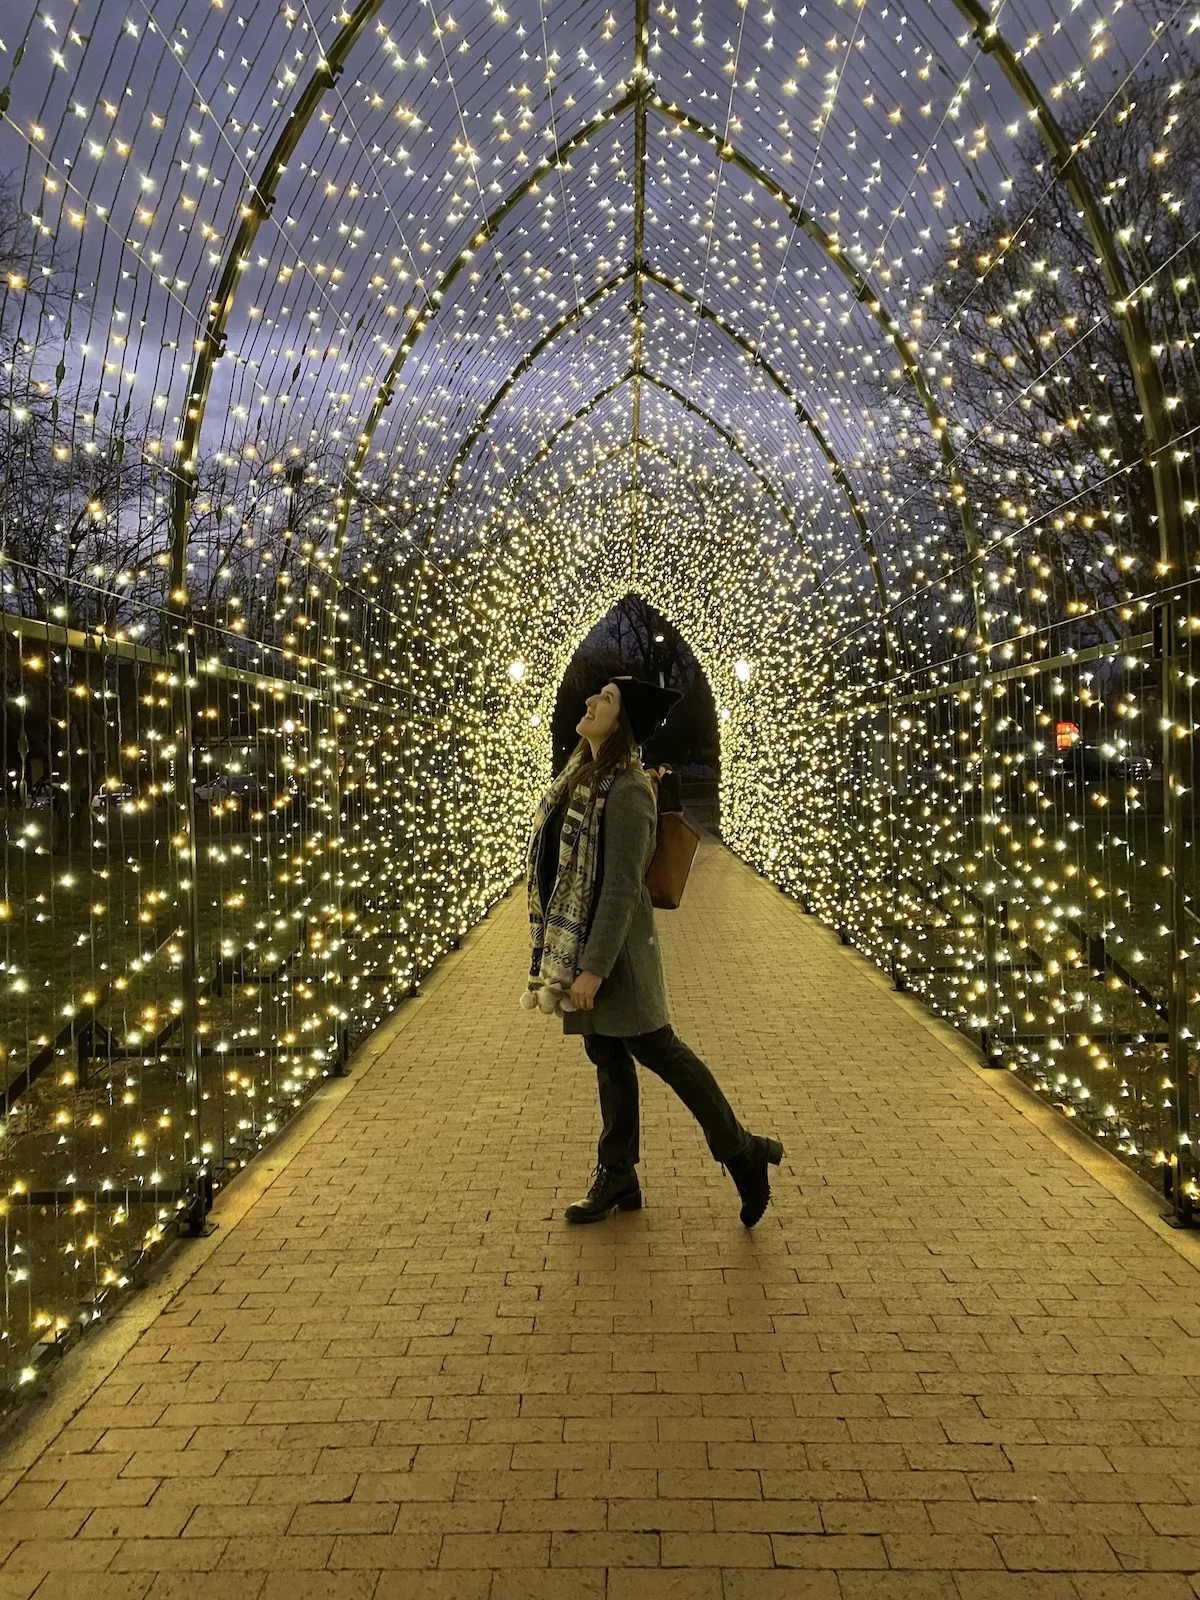 Woman standing under archway of lights in Central Park in Pella, Iowa